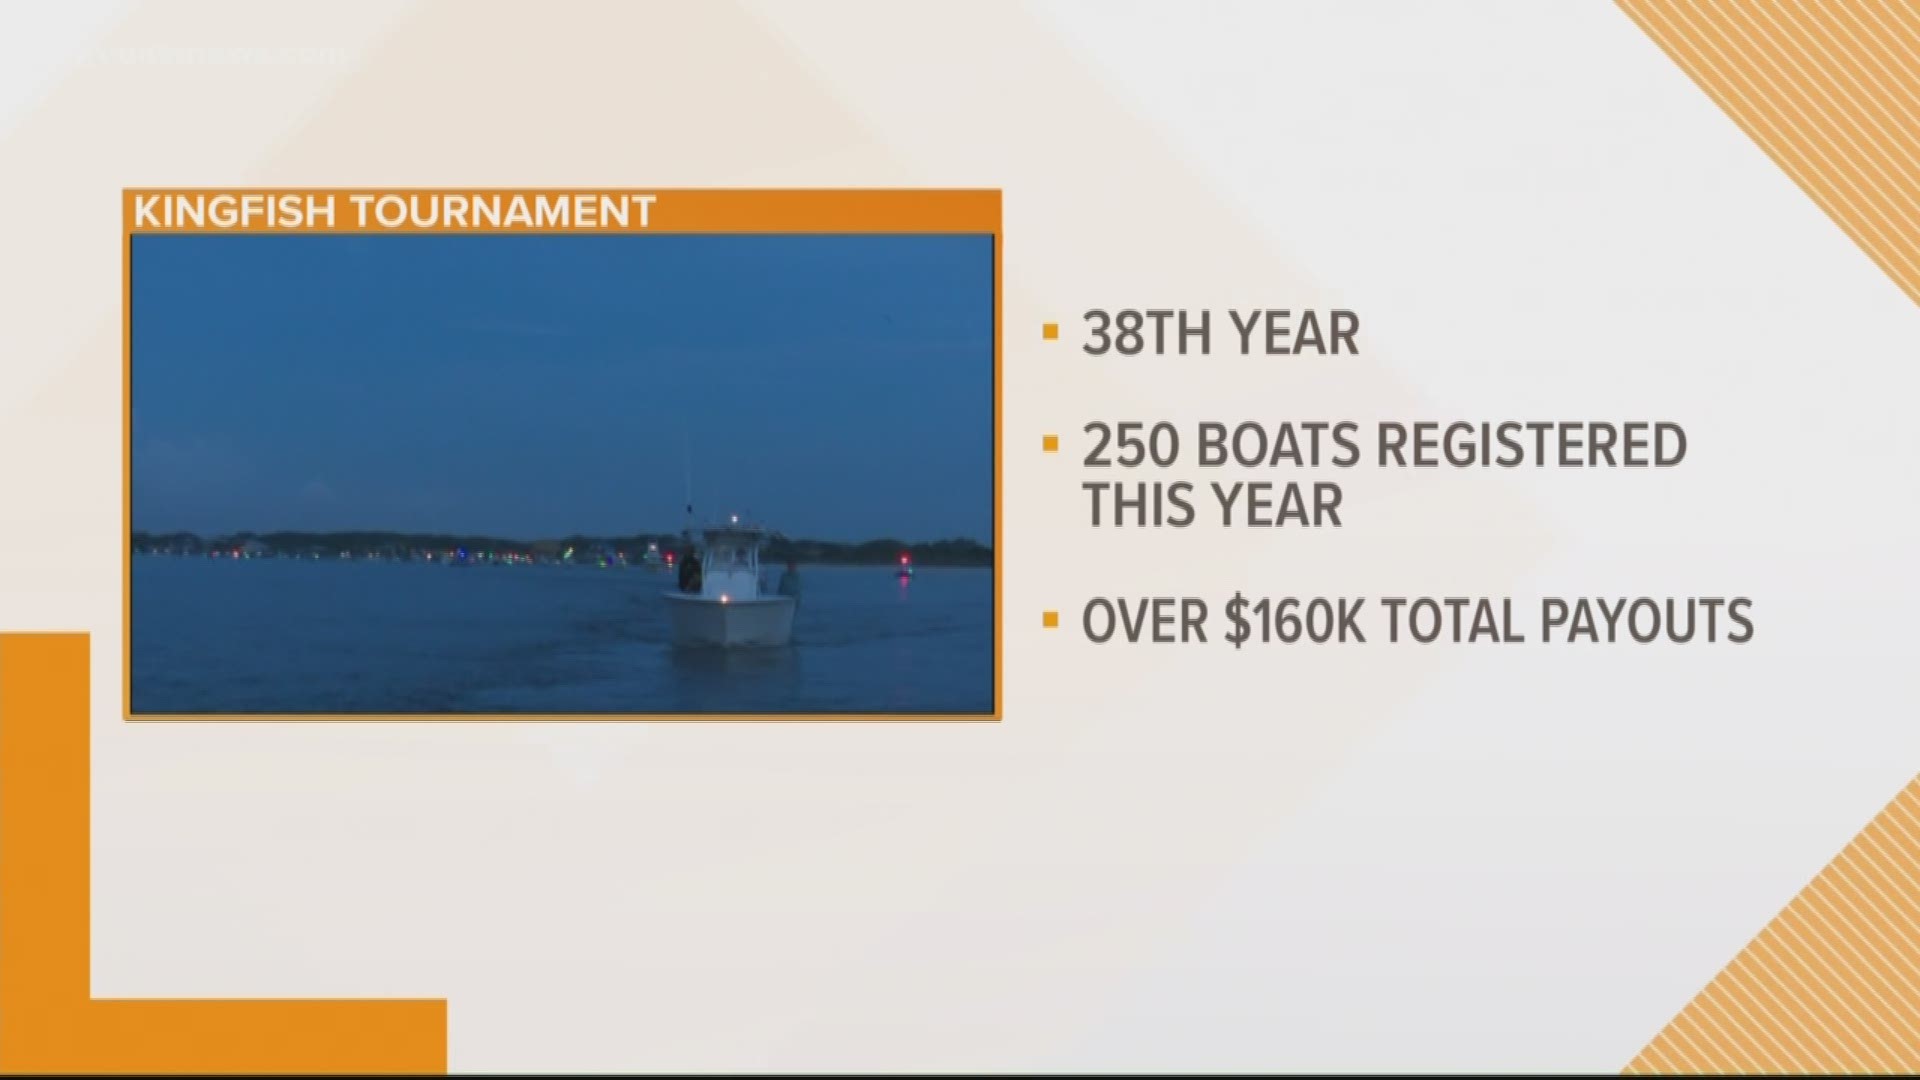 Today, hundreds of anglers will hit the St. Johns River hoping to catch the 'big ones.'